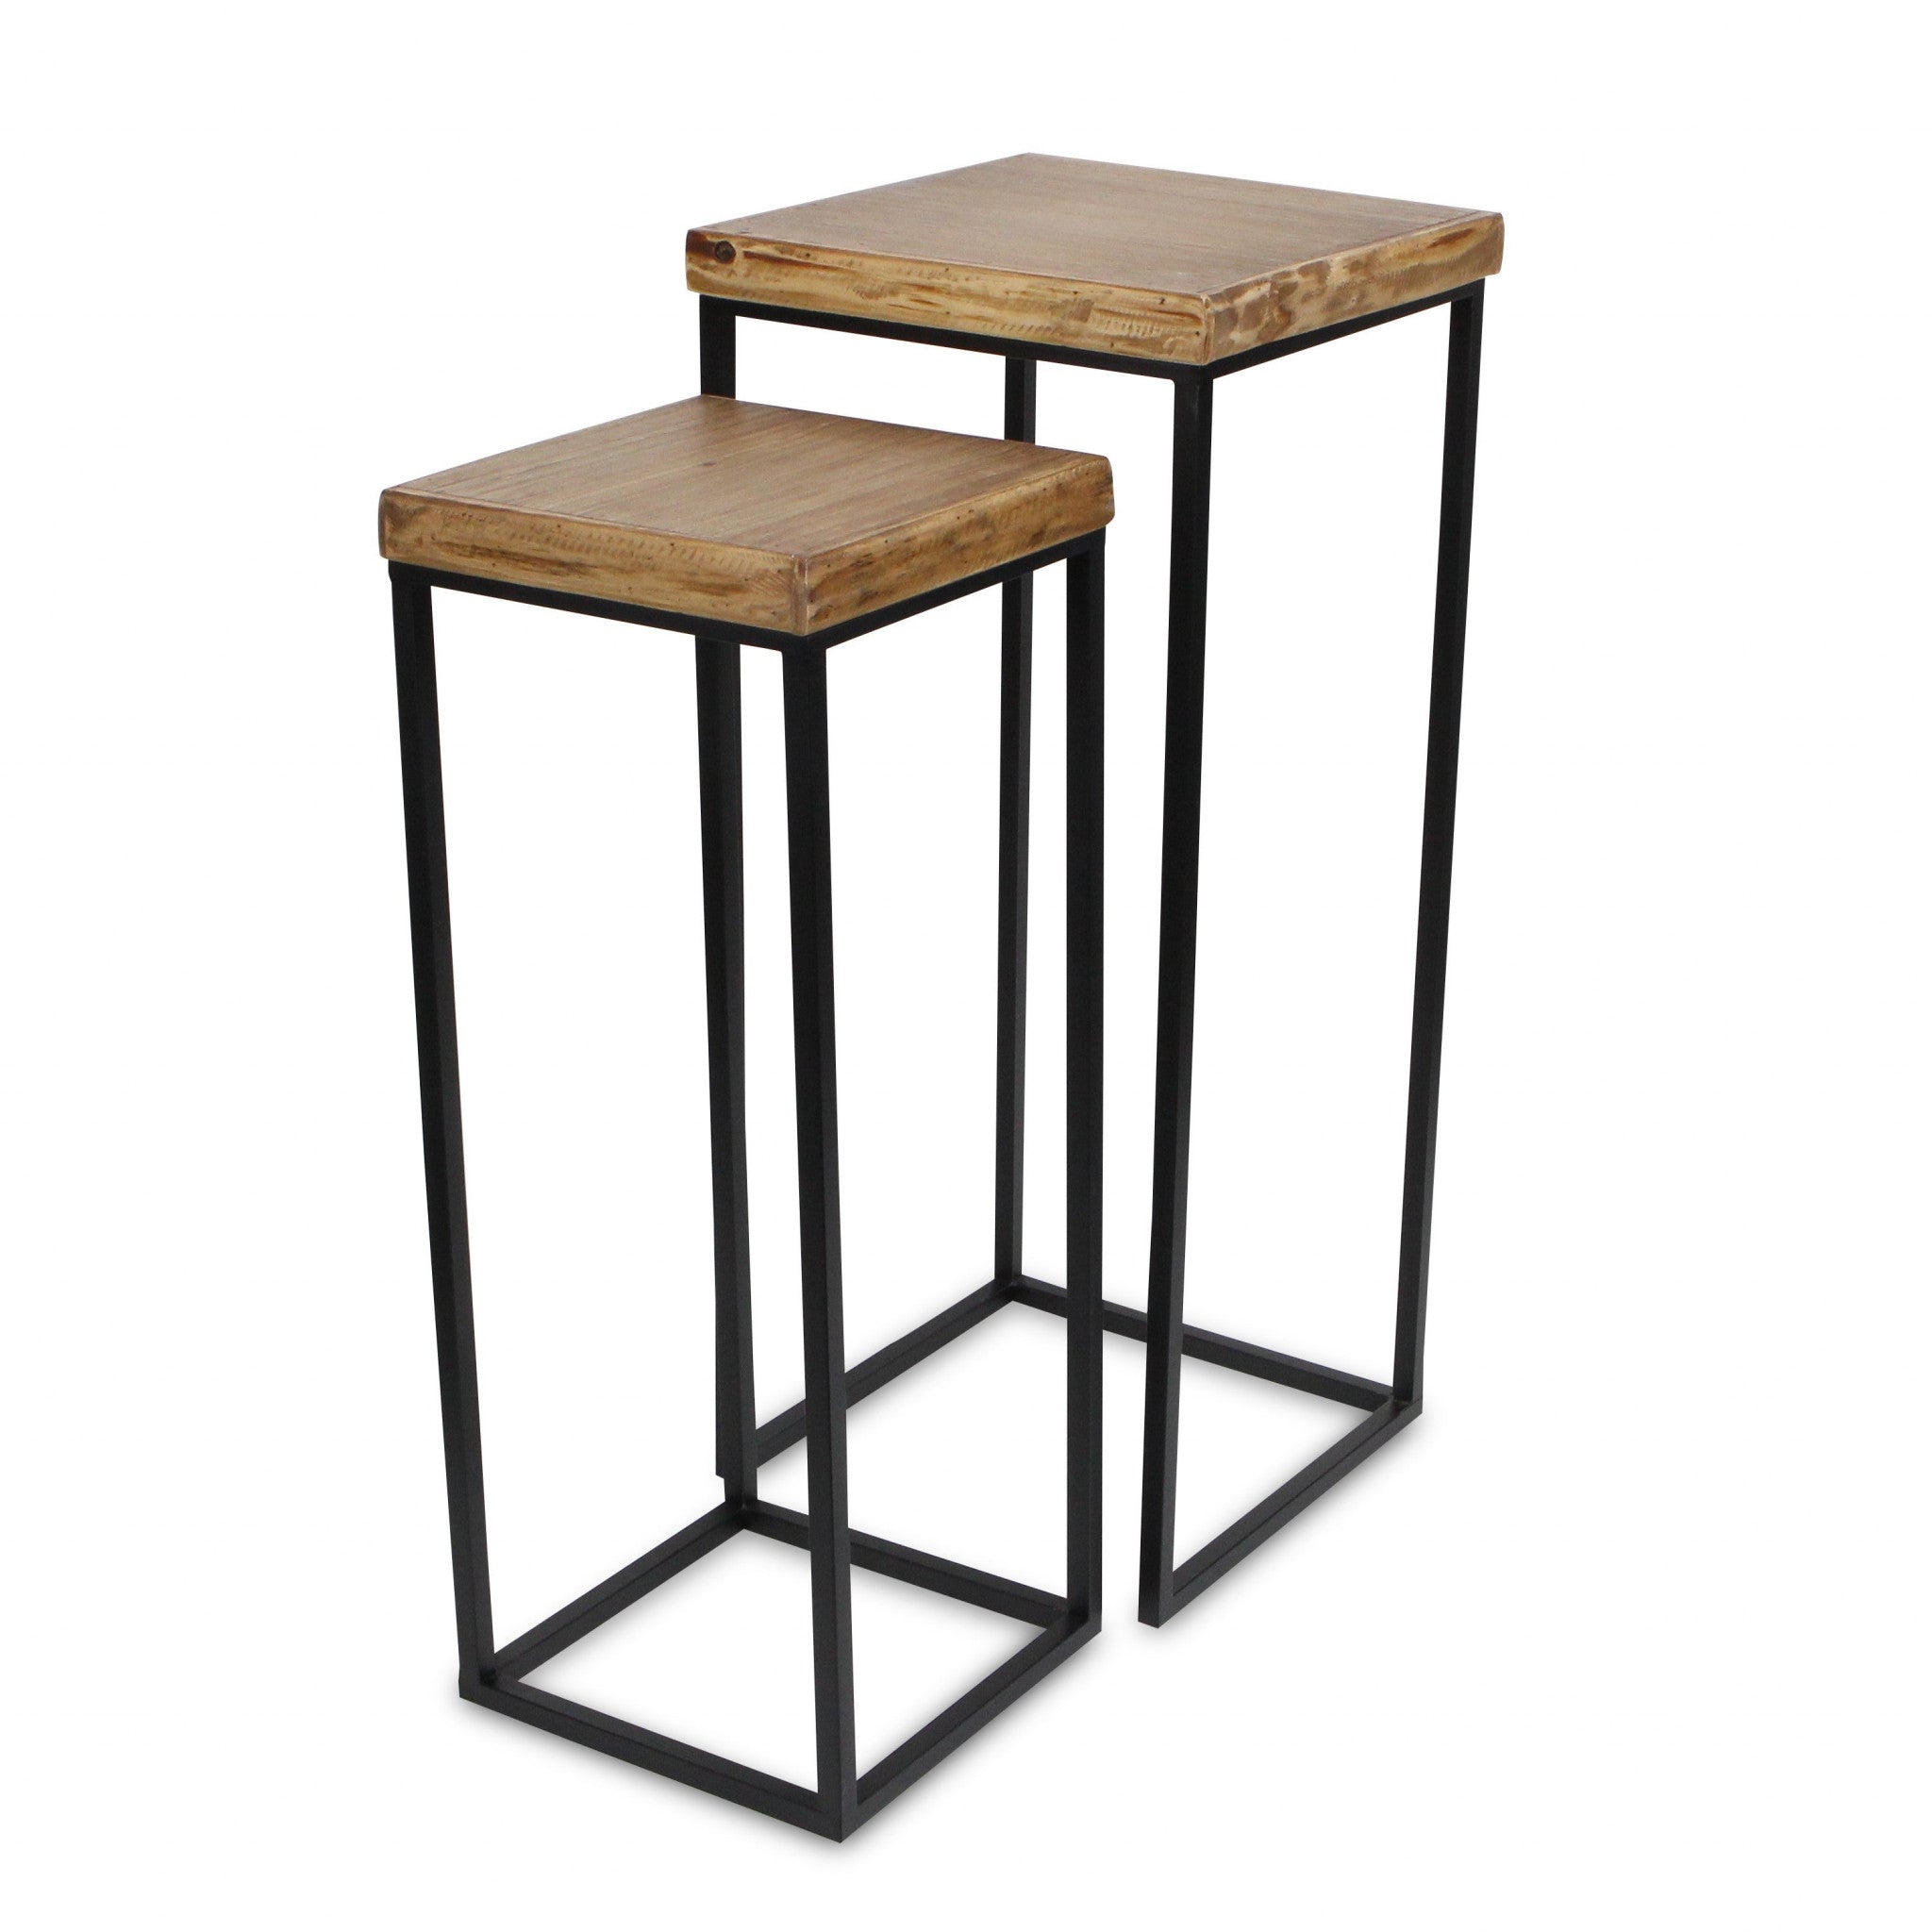 Set Of Two 29" Black And Brown Solid Wood And Steel Square Nested Tables